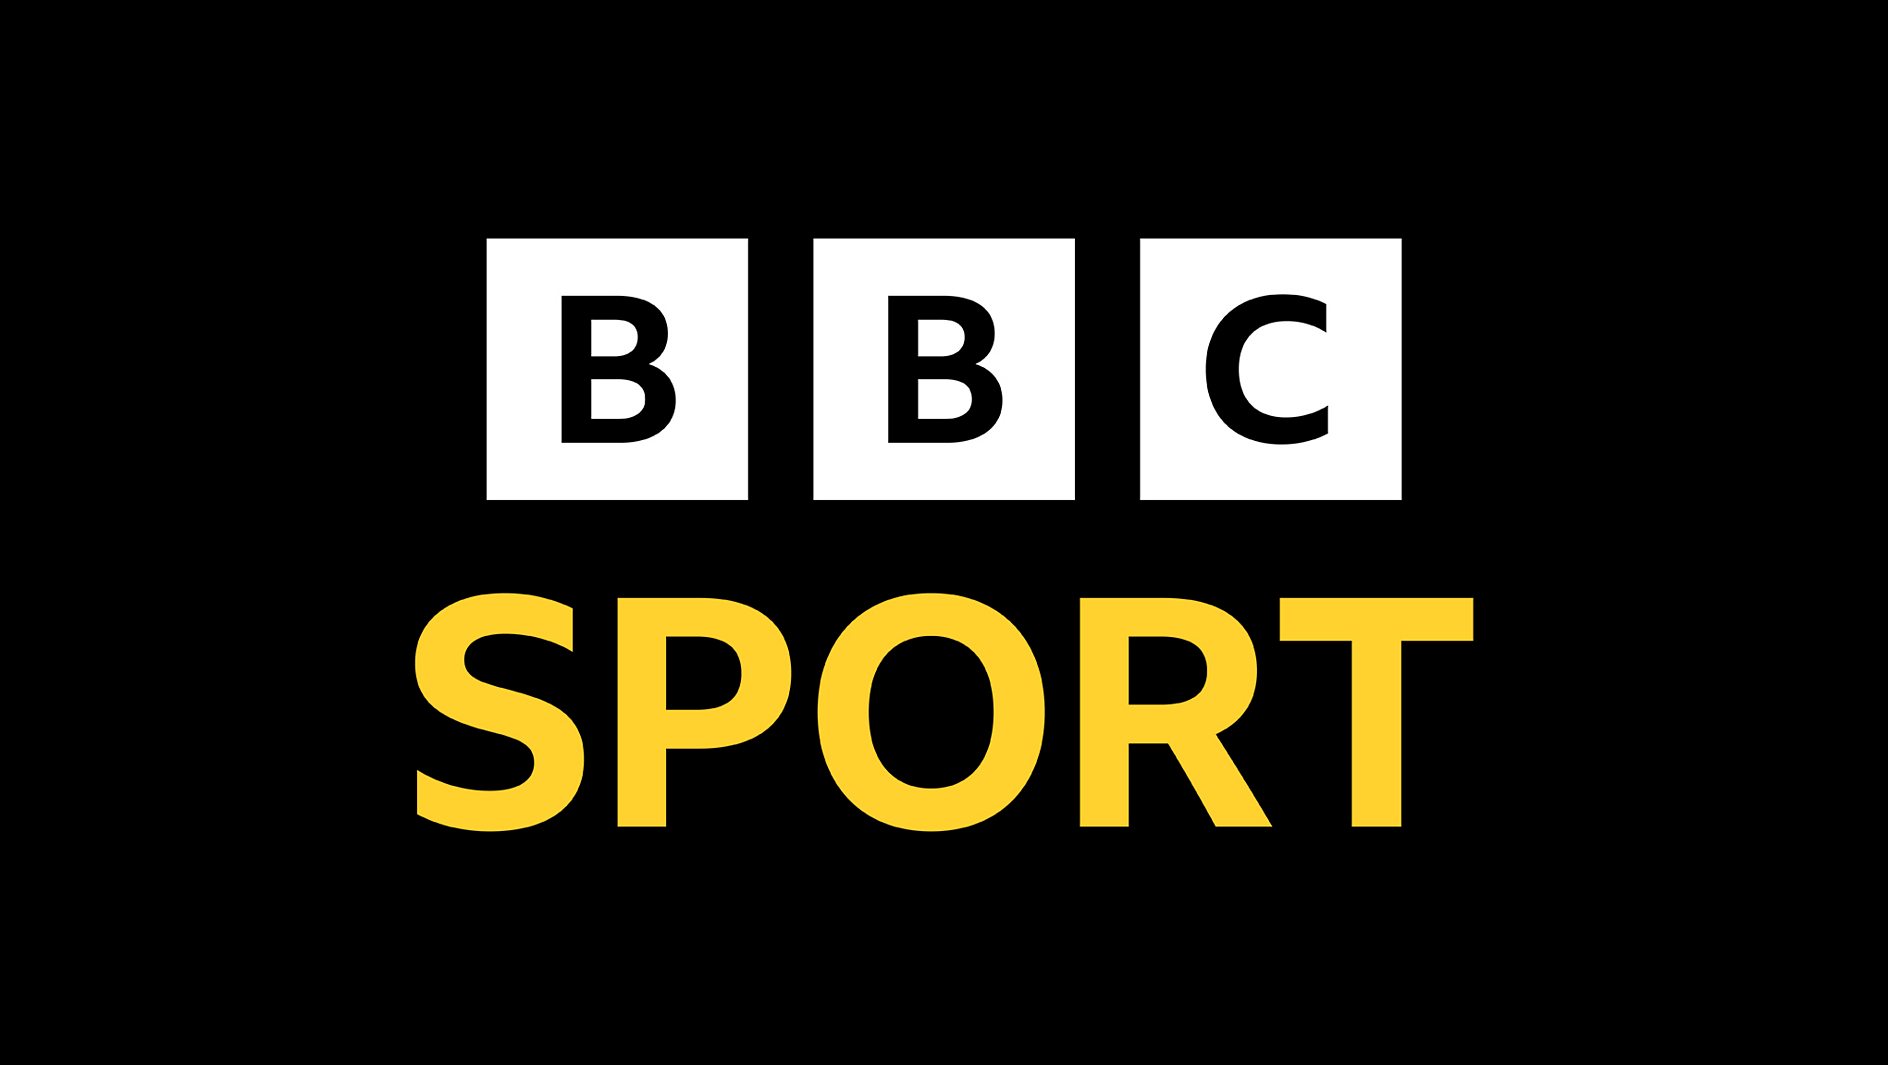 Record numbers watch the Women’s Super League on the BBC